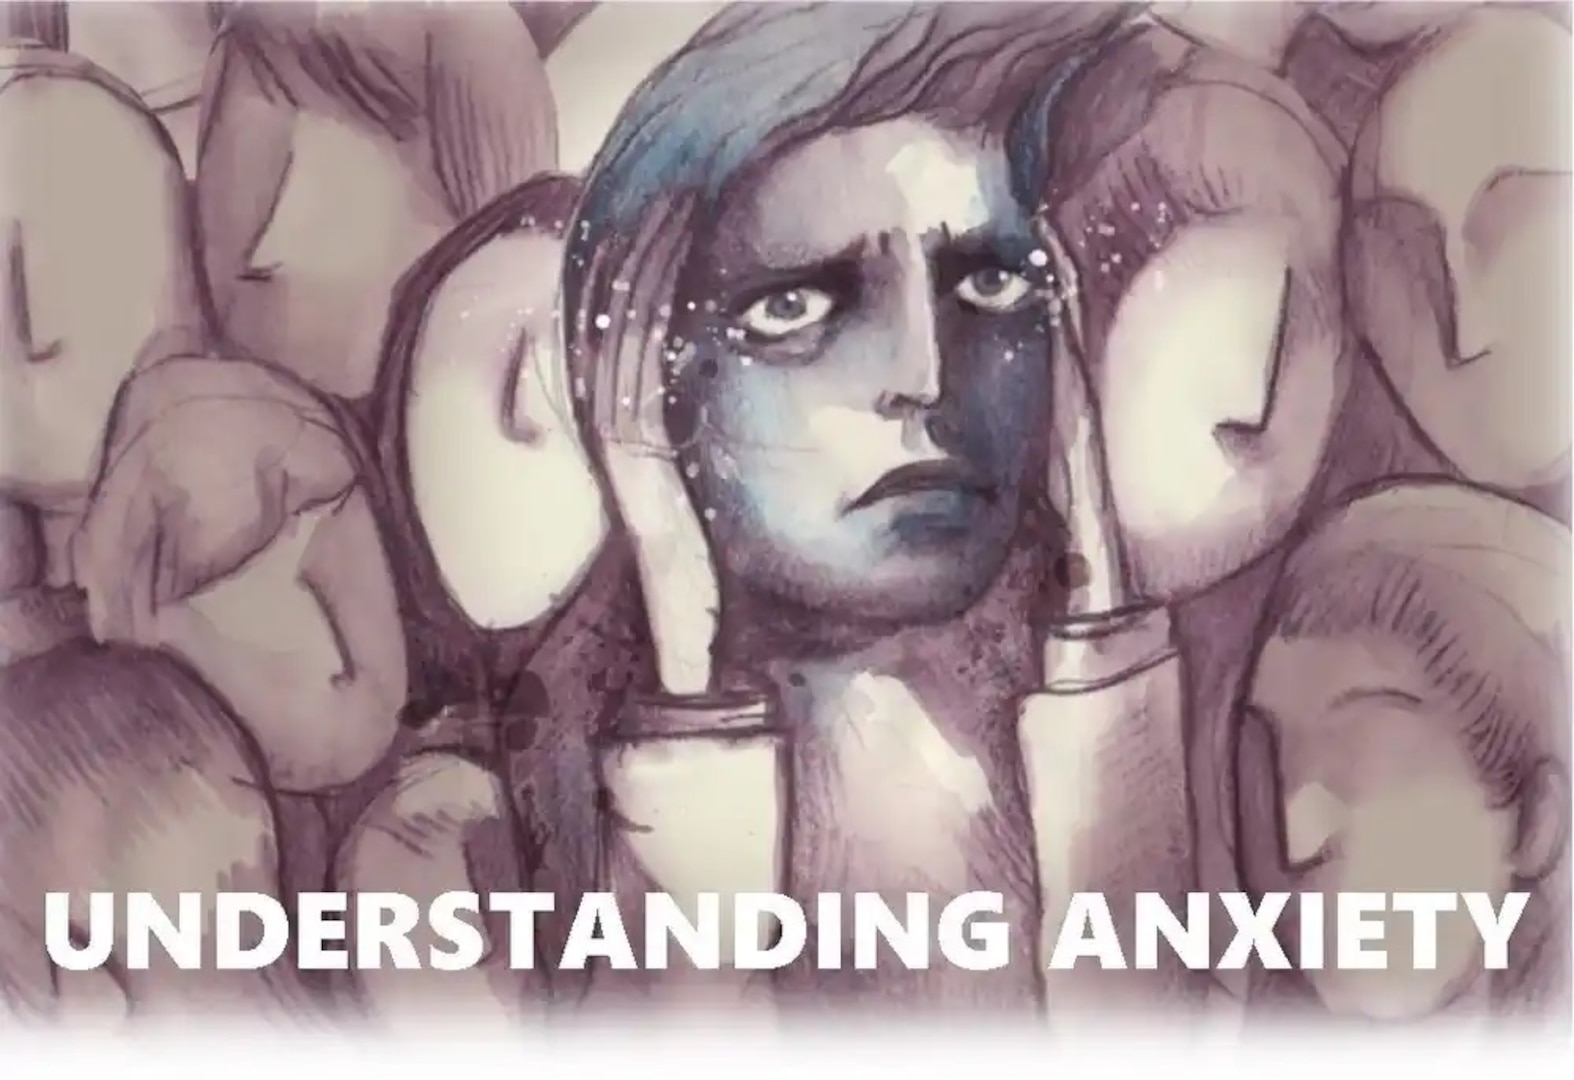 Experiencing occasional anxiety is not necessarily a bad thing, but when the symptoms begin to impact your life in a negative manner, there are simple strategies to manage the condition. There are also places you can go for help.